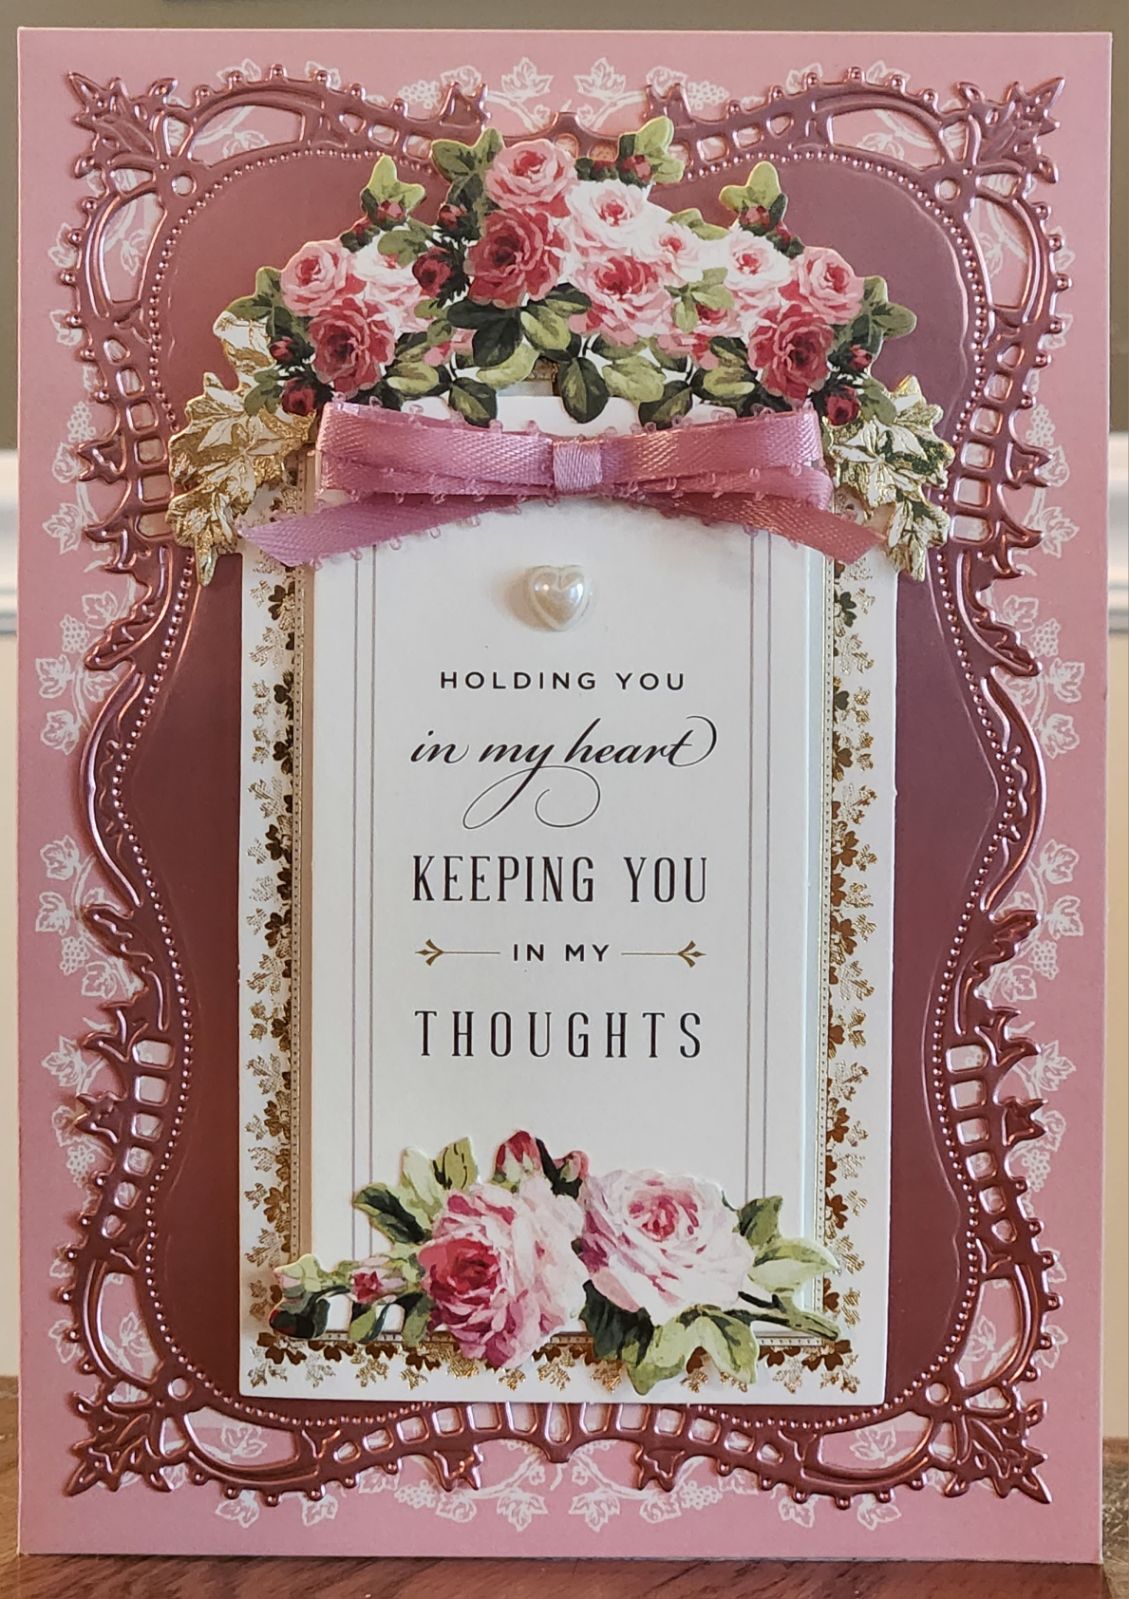 A pink card with roses on it.